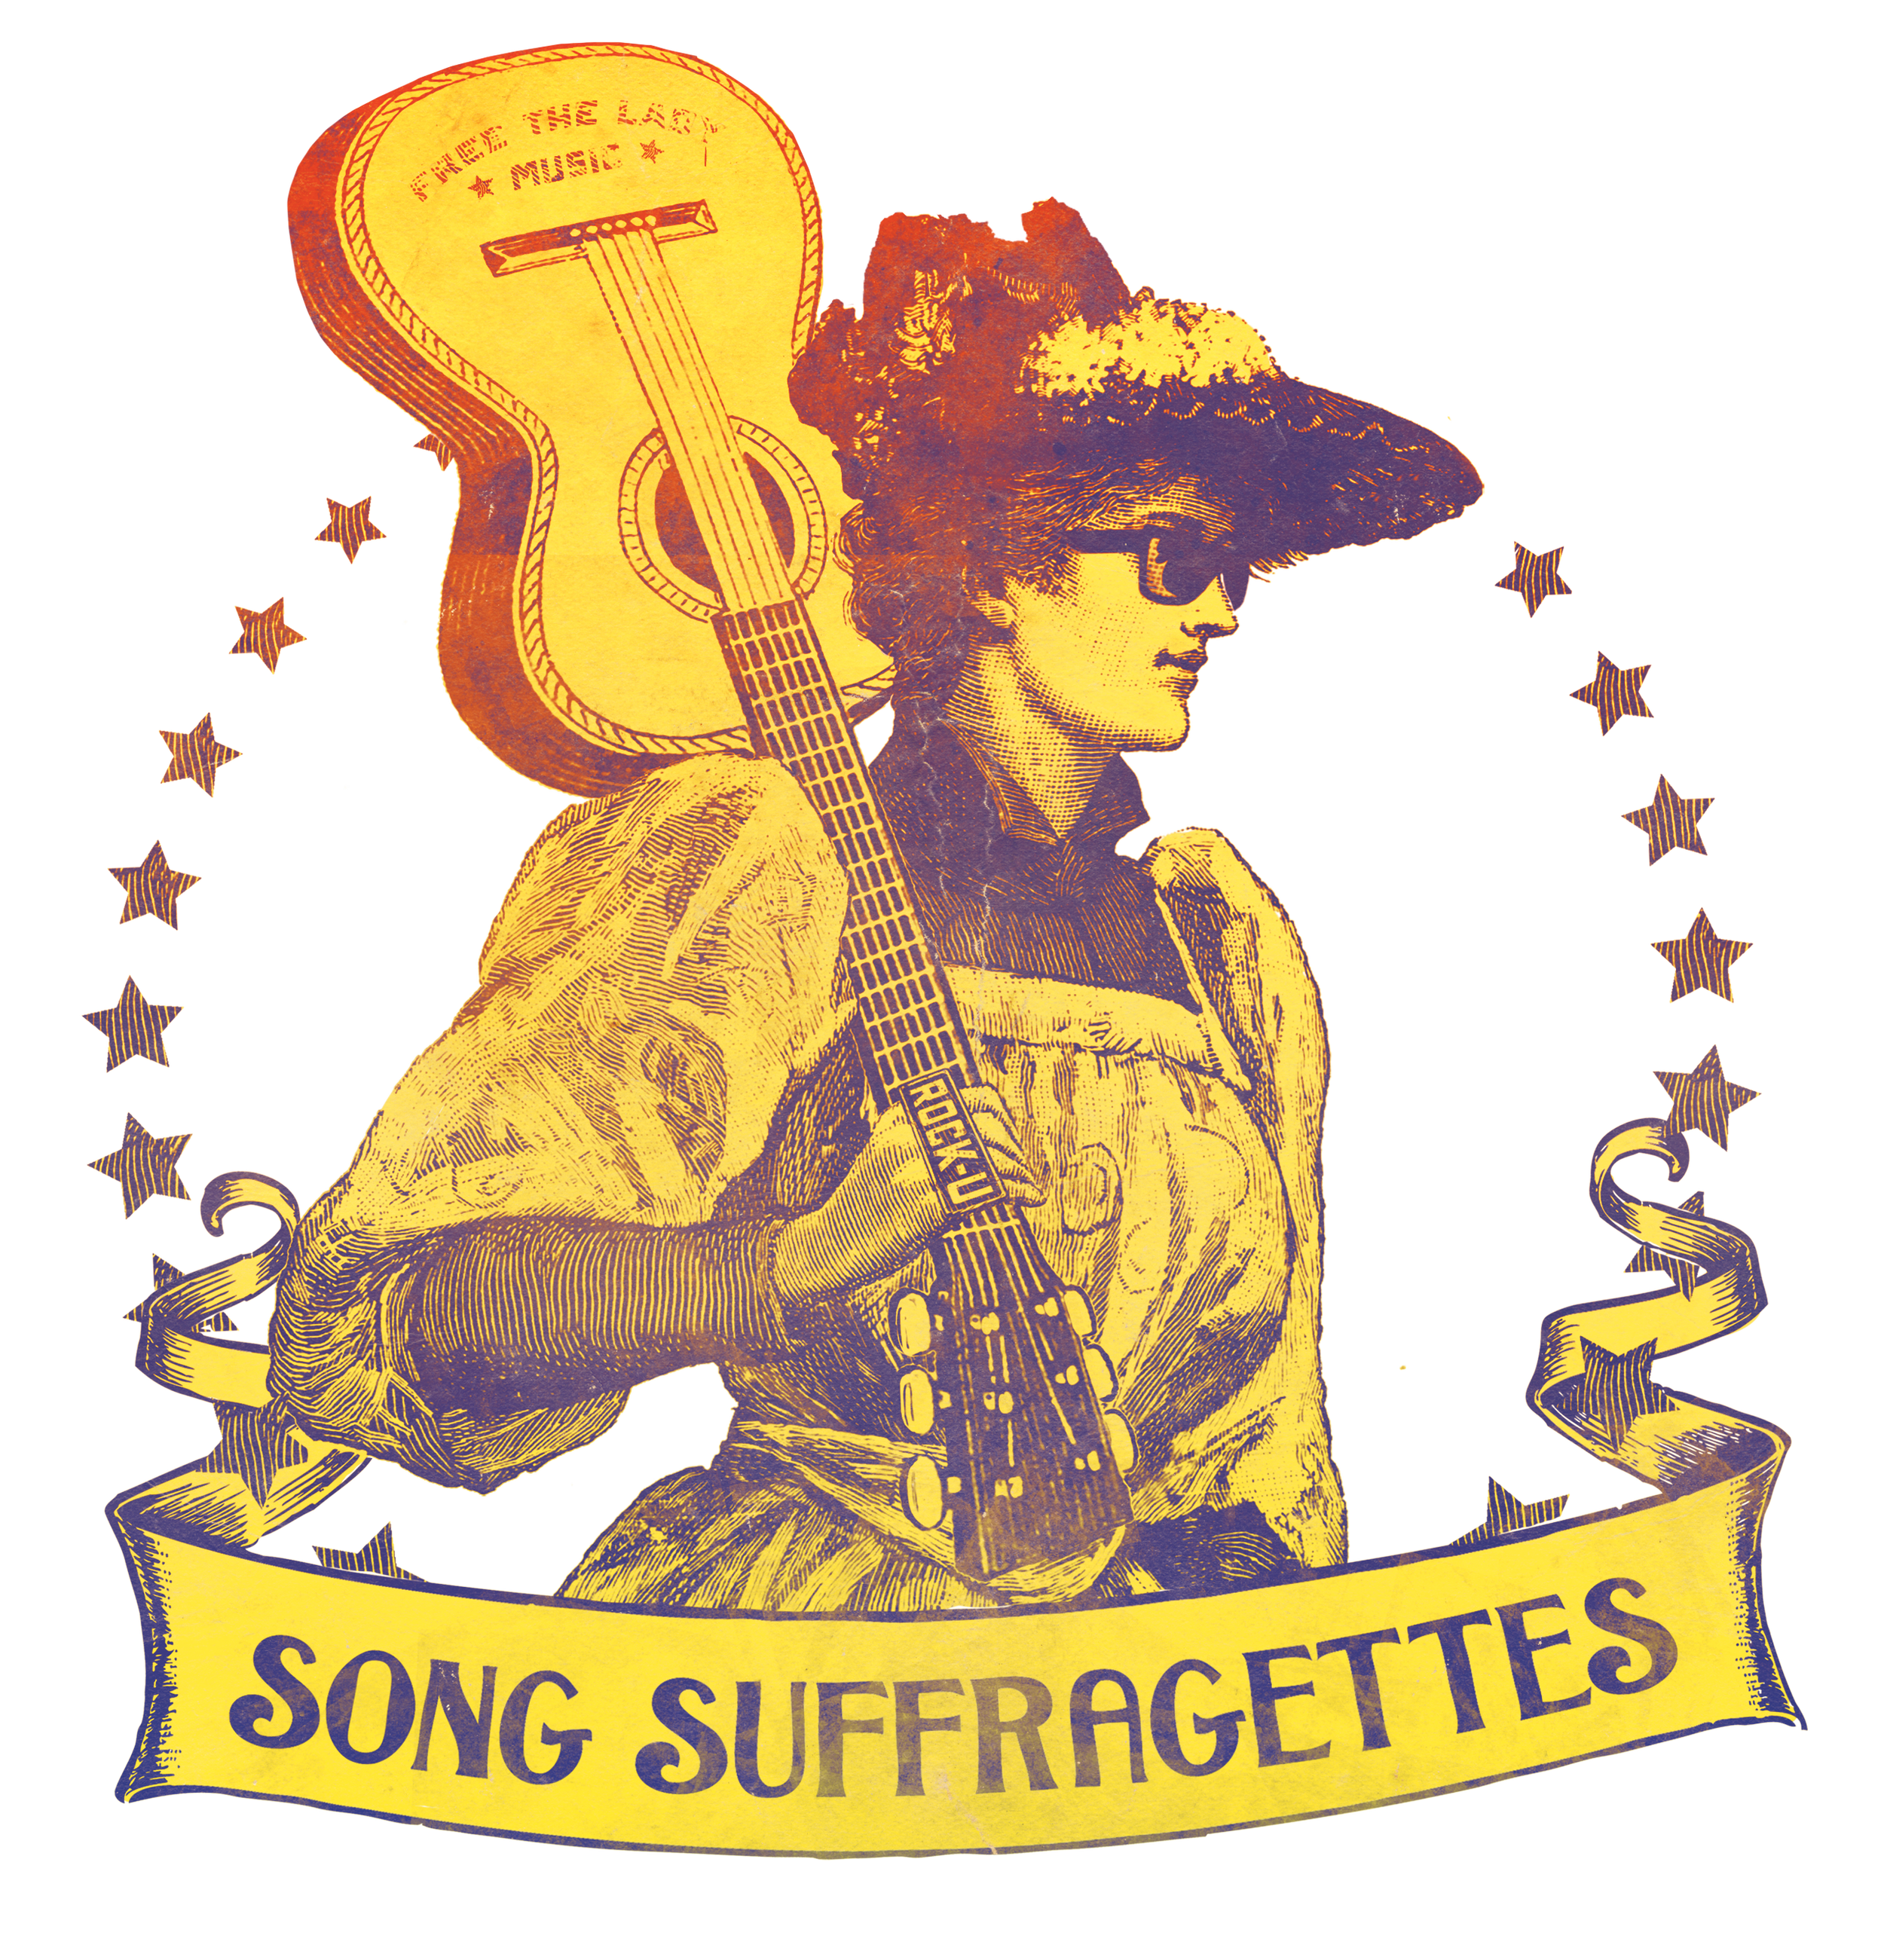 SONG SUFFRAGETTES